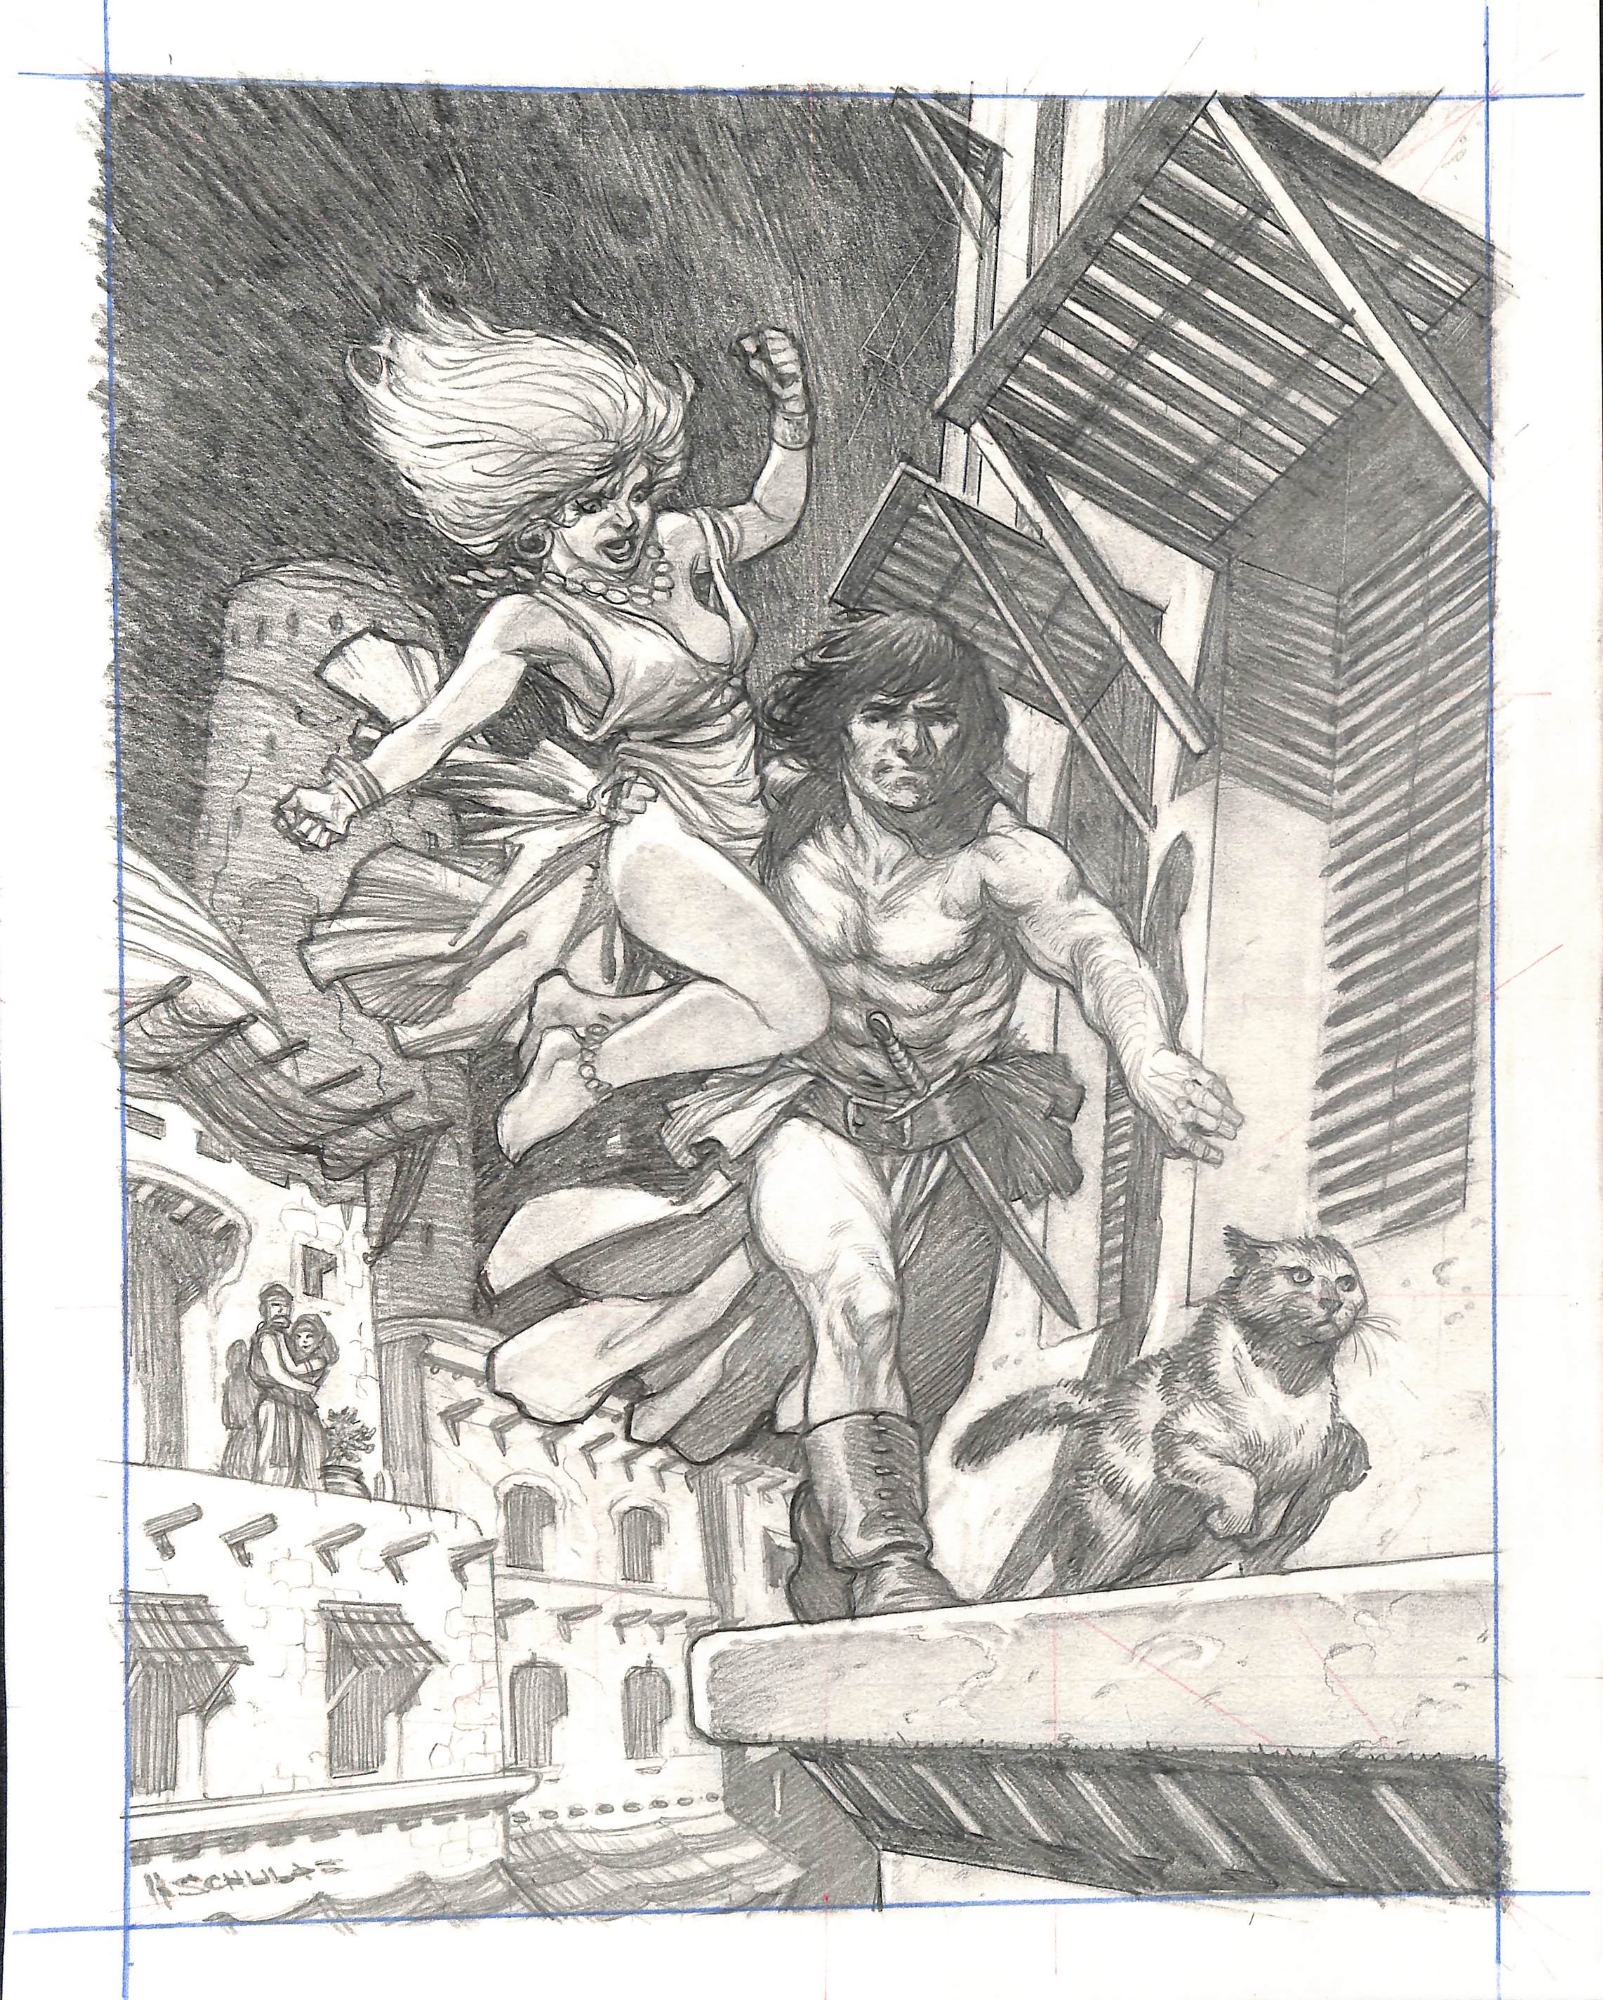 Conan Rogues in the House Chapter 3 Header, in Peter P's Mark Schultz Comic  Art Gallery Room